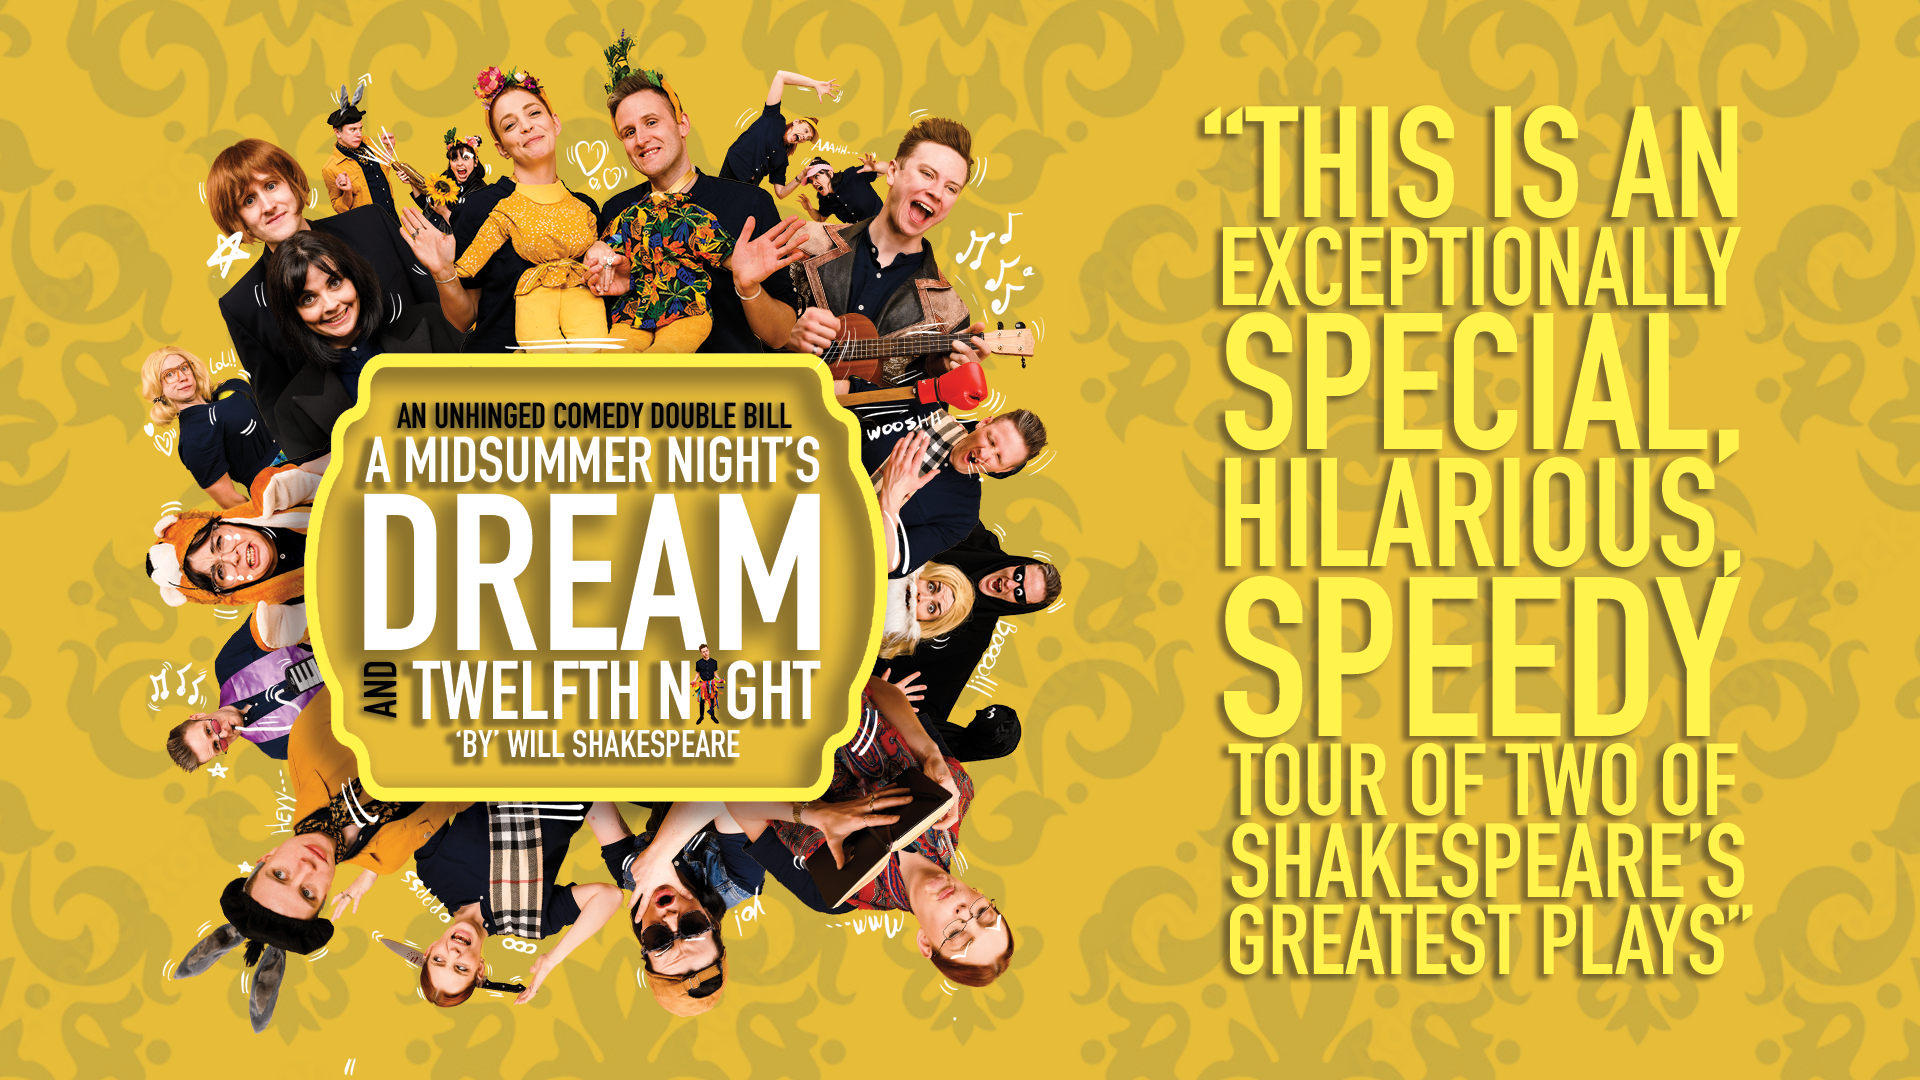 An unhinged comedy double bill - A Midsummer Night's Dream and Twelfth Night 'by' Will Shakespeare